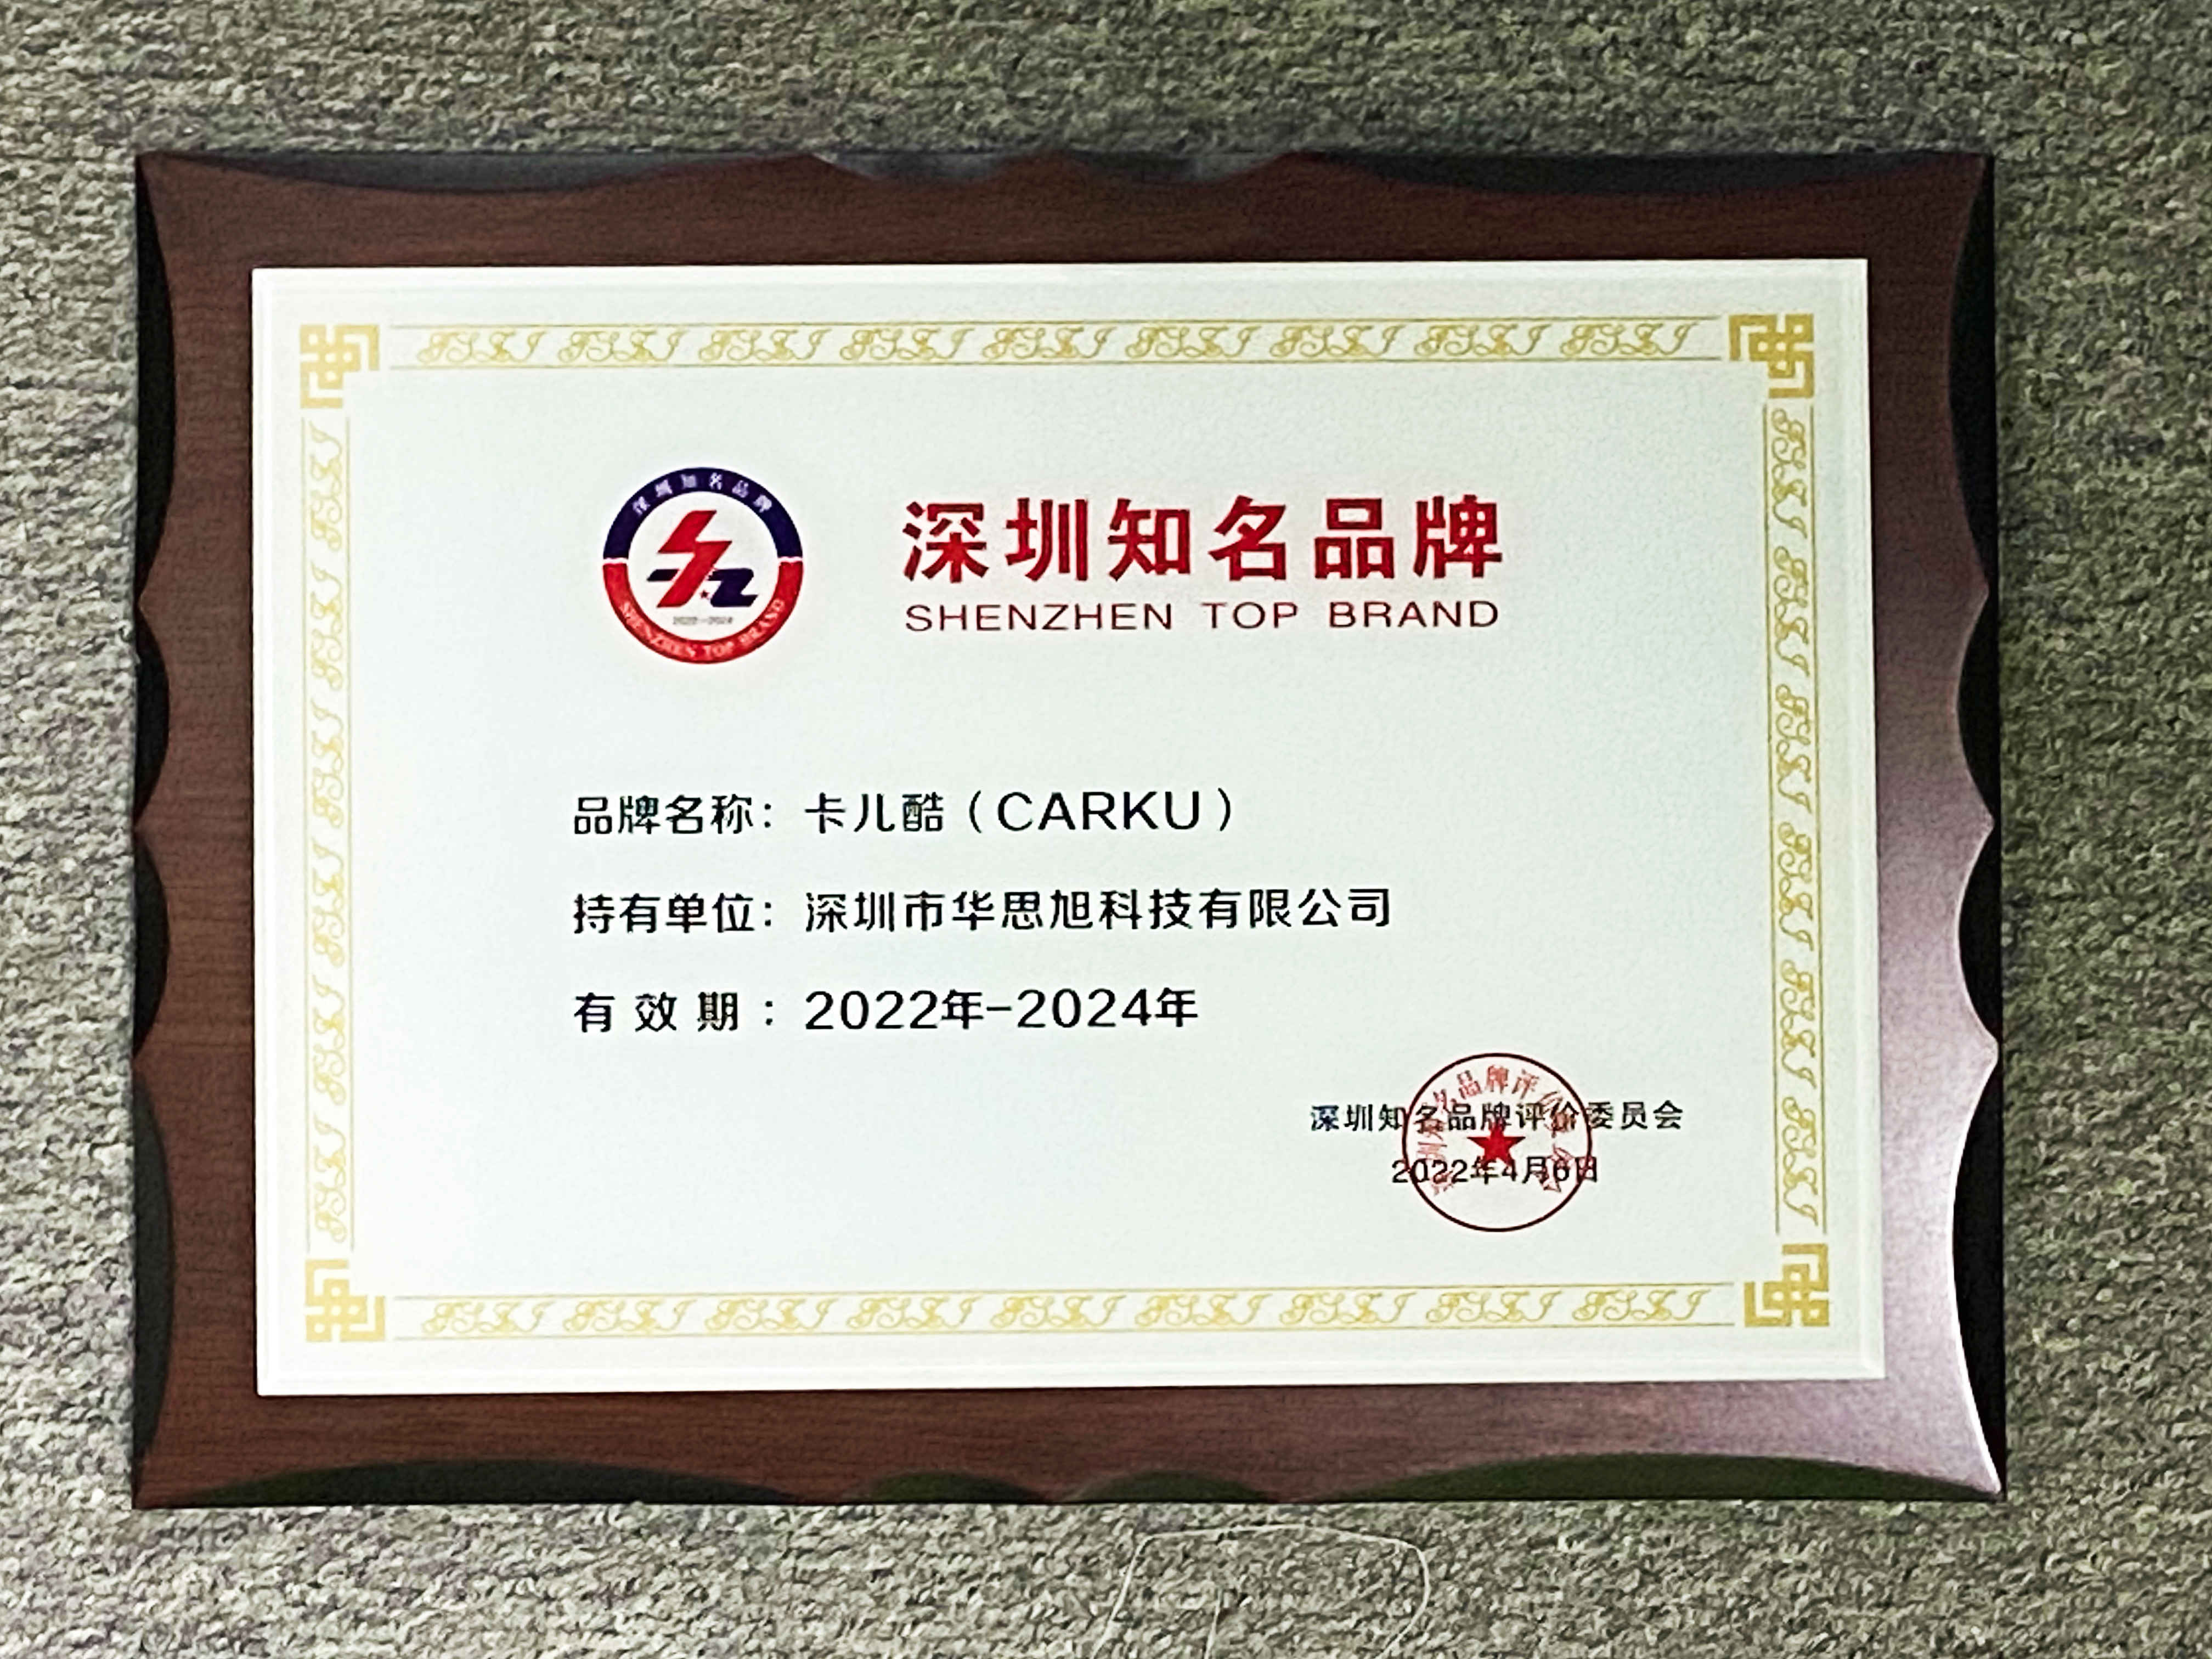 CARKU won the honor of “Shenzhen Famous Brand” again